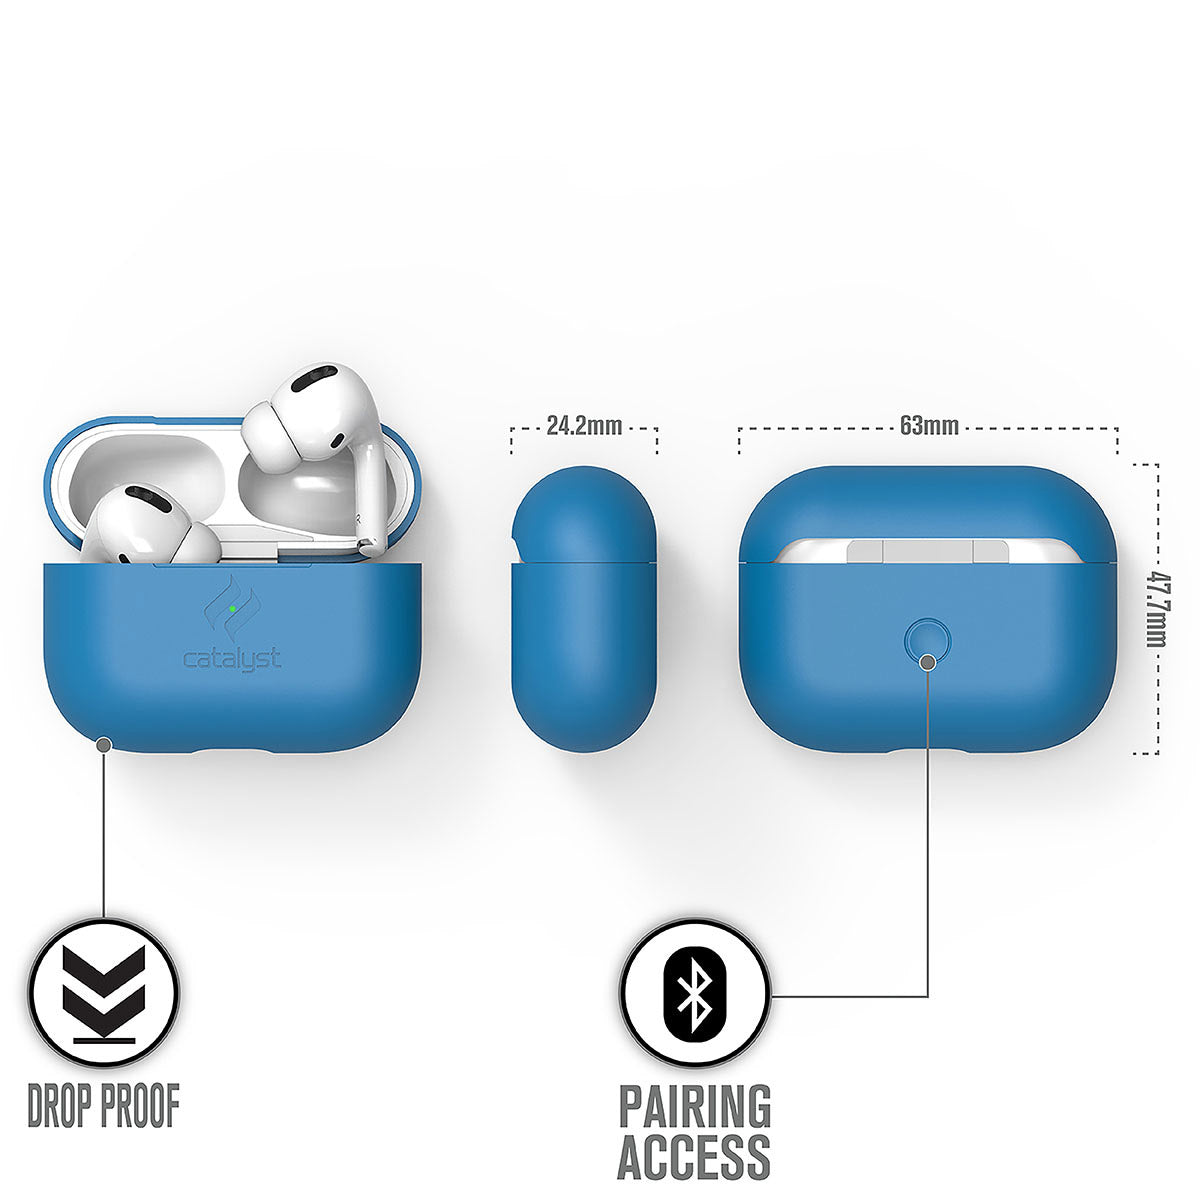 Catalyst airpods pro gen 2/1 slim case showing the case dimensions in a neon blue colorway text reads drop proof pairing access